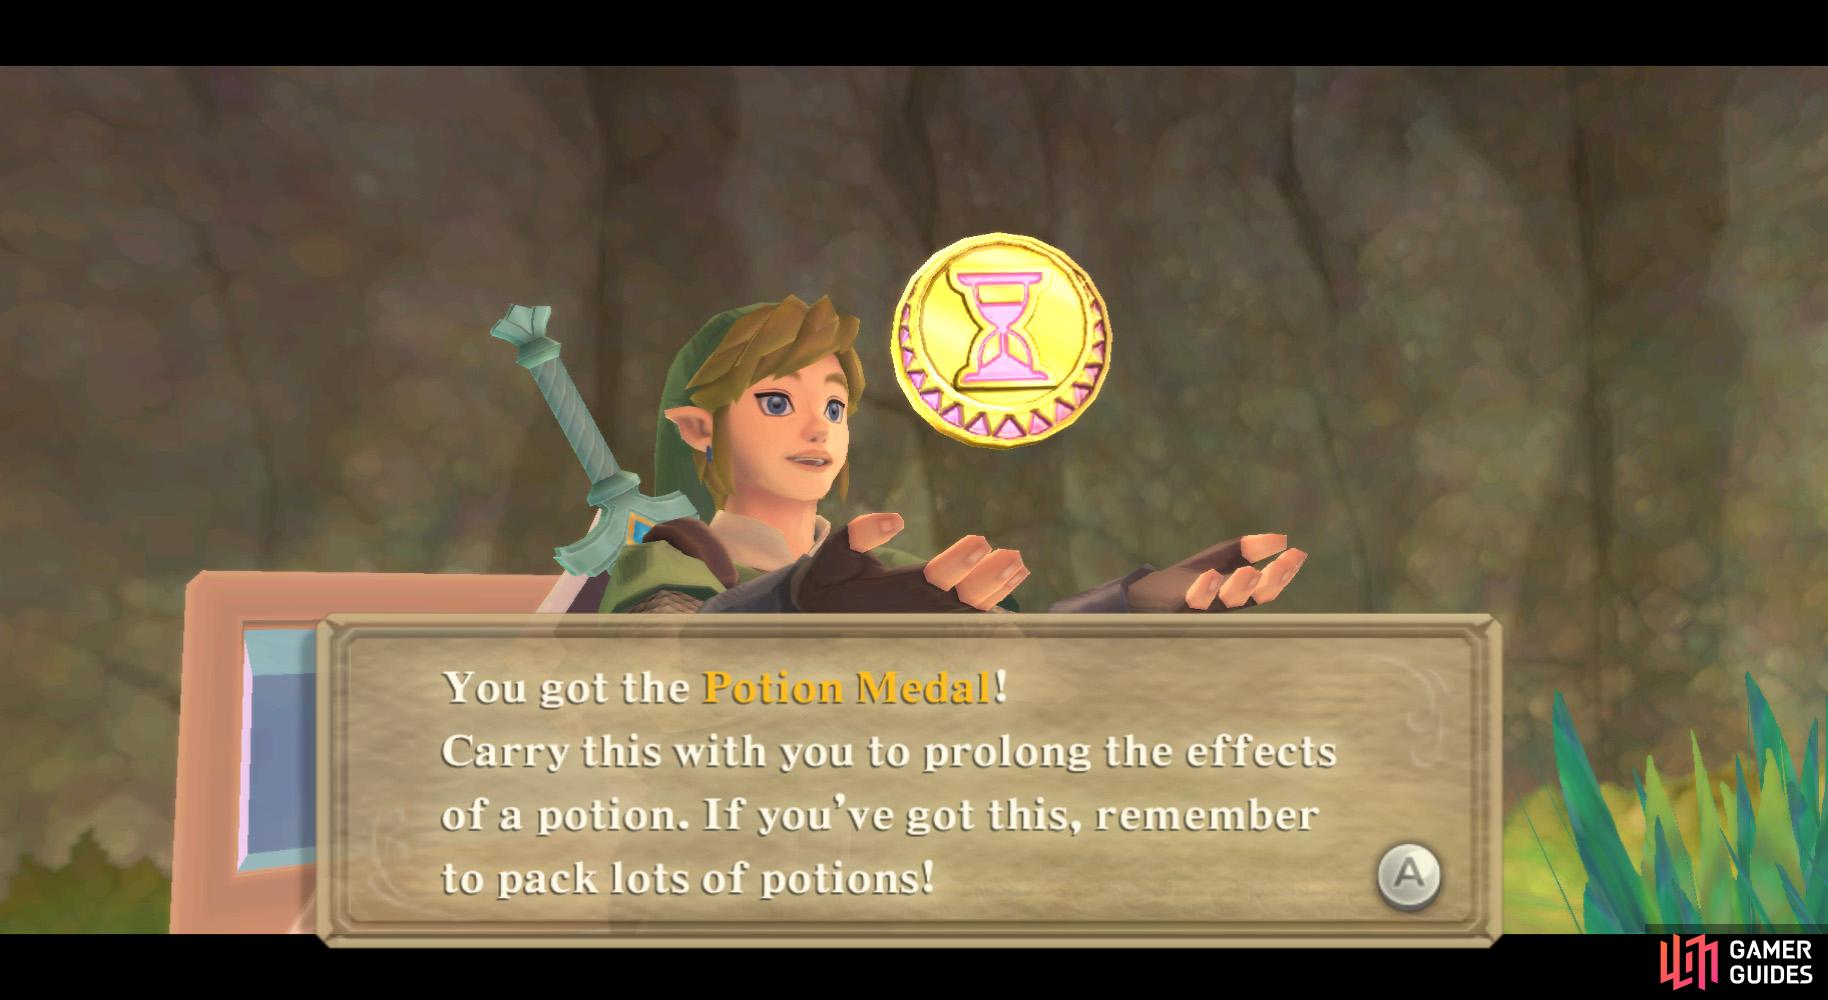 This medal makes potion effects last longer than normal.